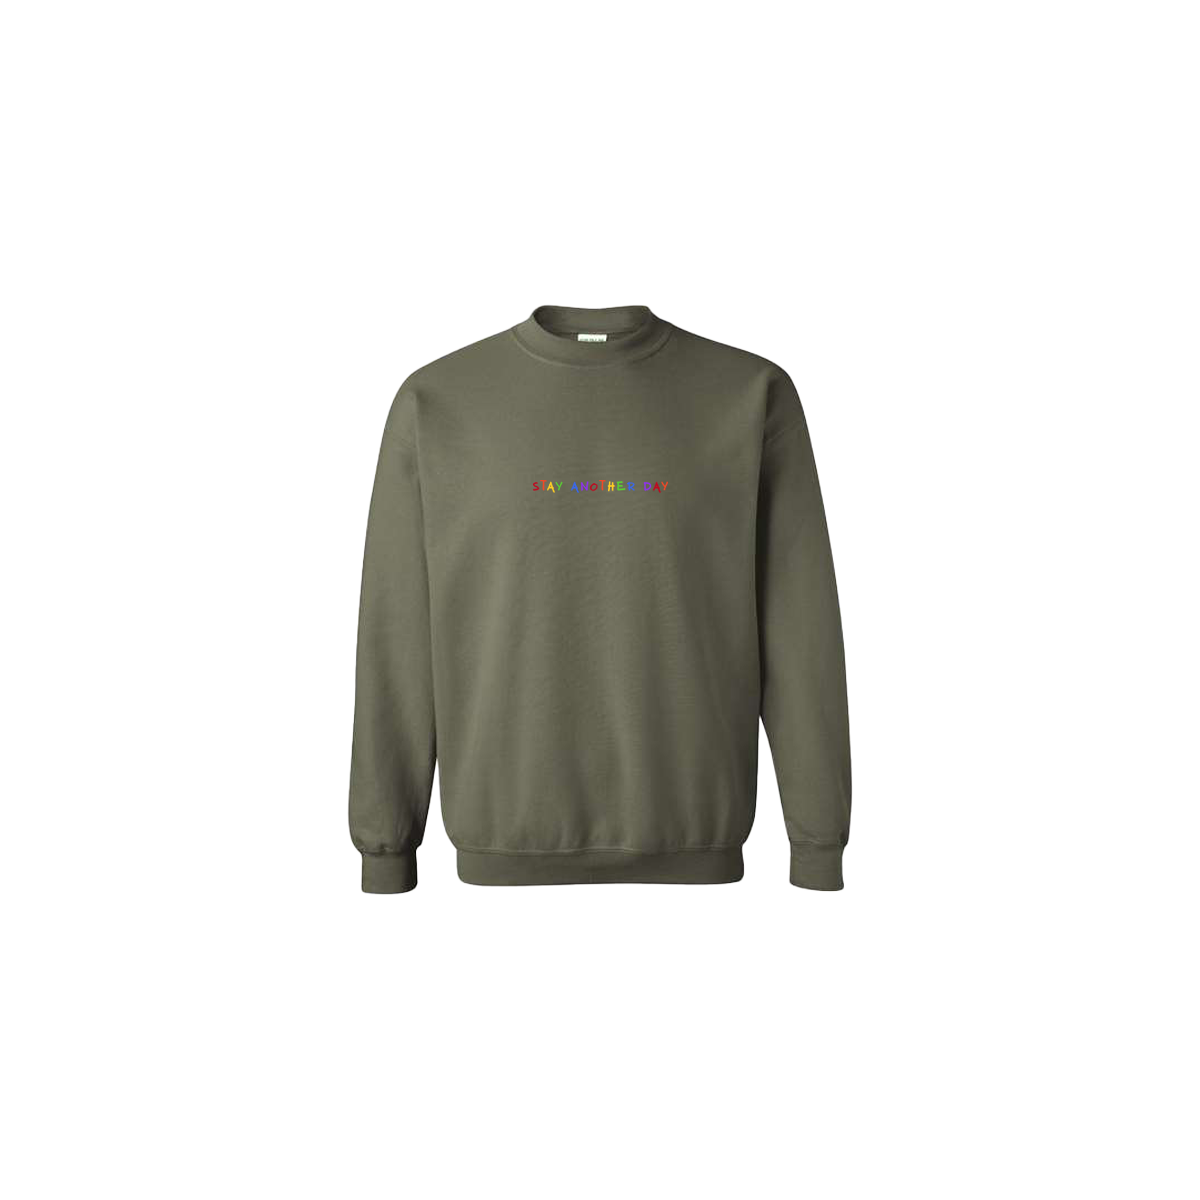 Stay Another Day Rainbow Embroidered ArmyGreen Crewneck - Mental Health Awareness Clothing